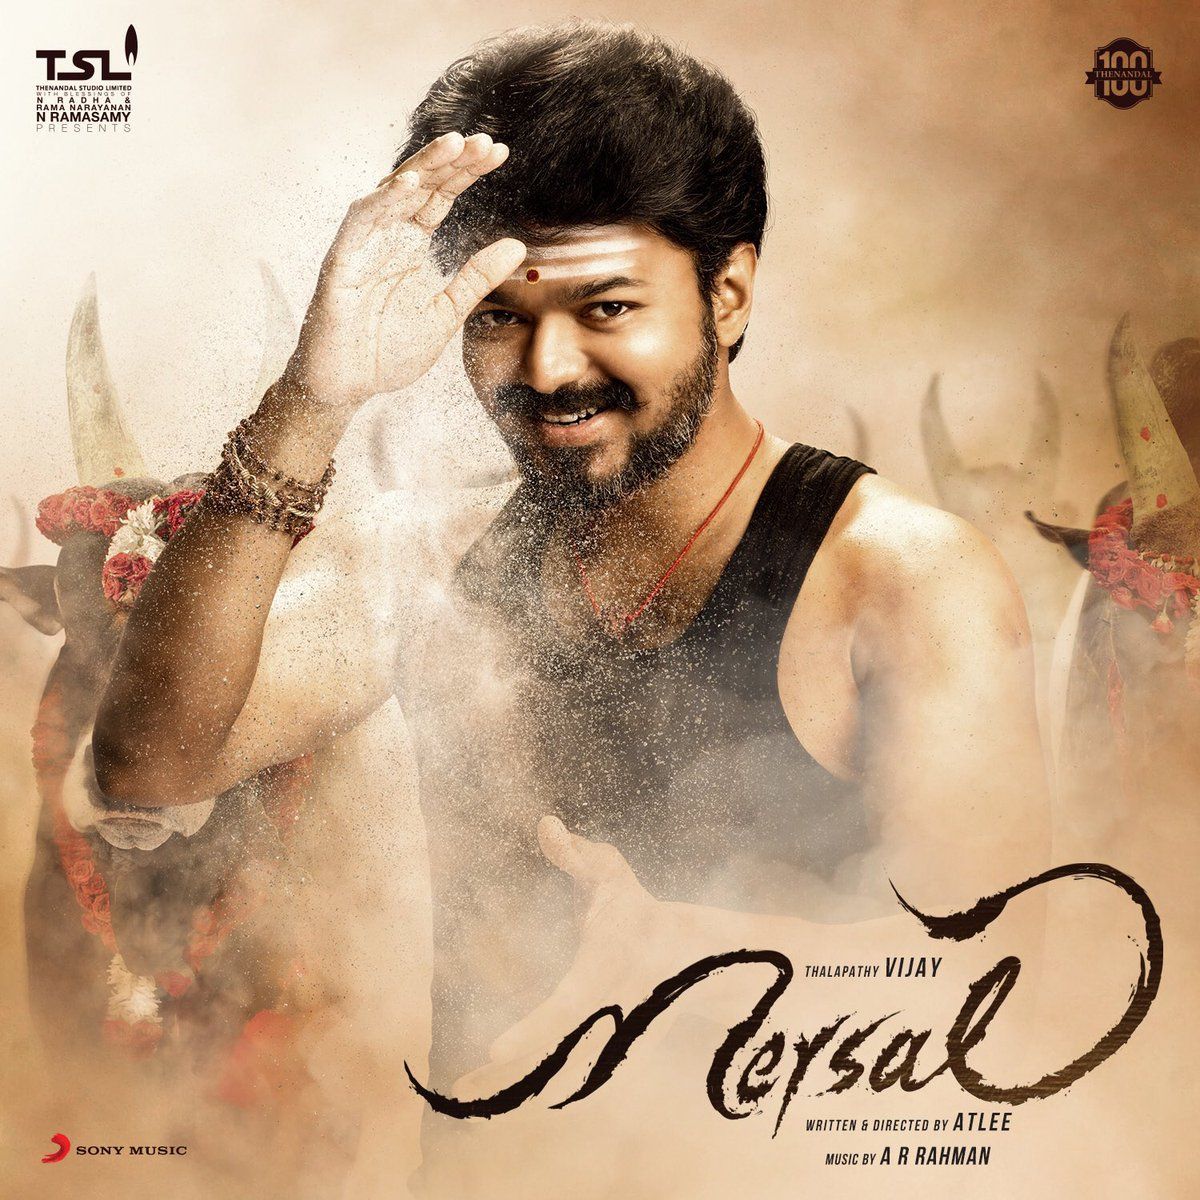 Television Channel Plays ‘Aalaporan Thamizhan' Twice During Mersal